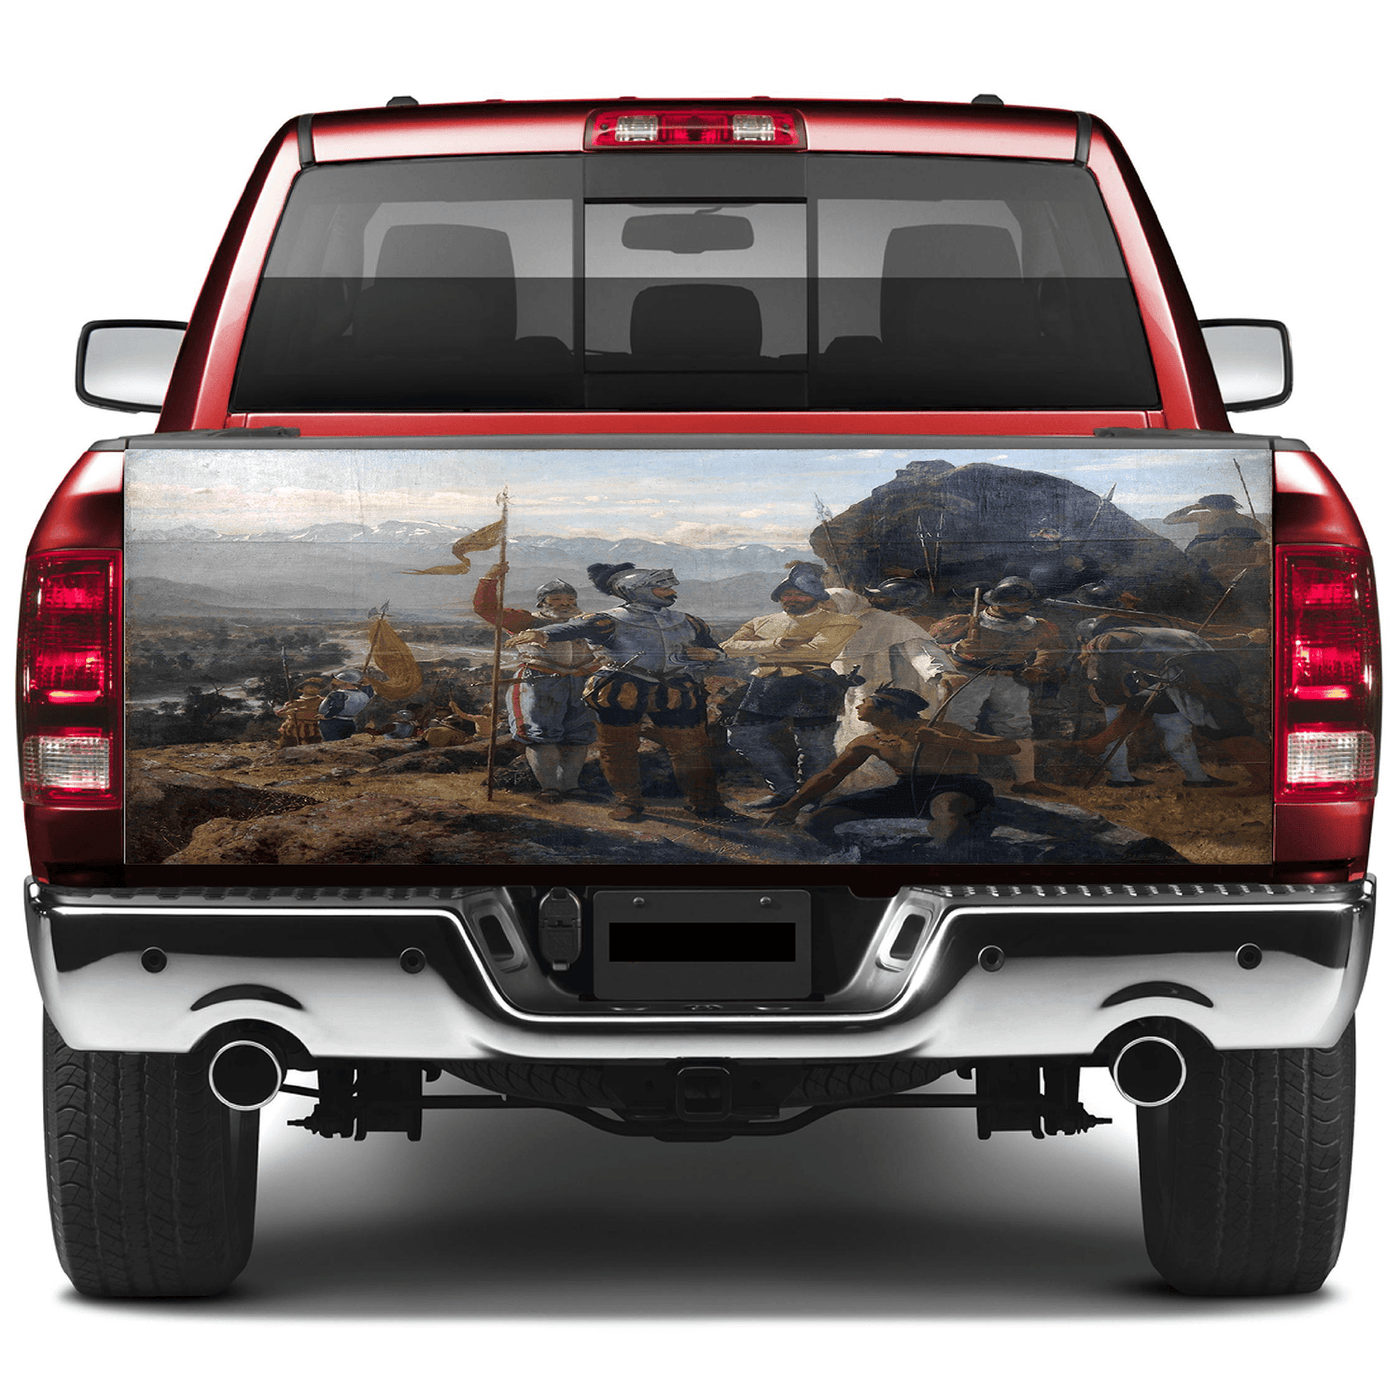 Tailgate Wraps For Trucks Wrap Vinyl Car Decals Founding of Santiago, Chile SUV Car Sticker